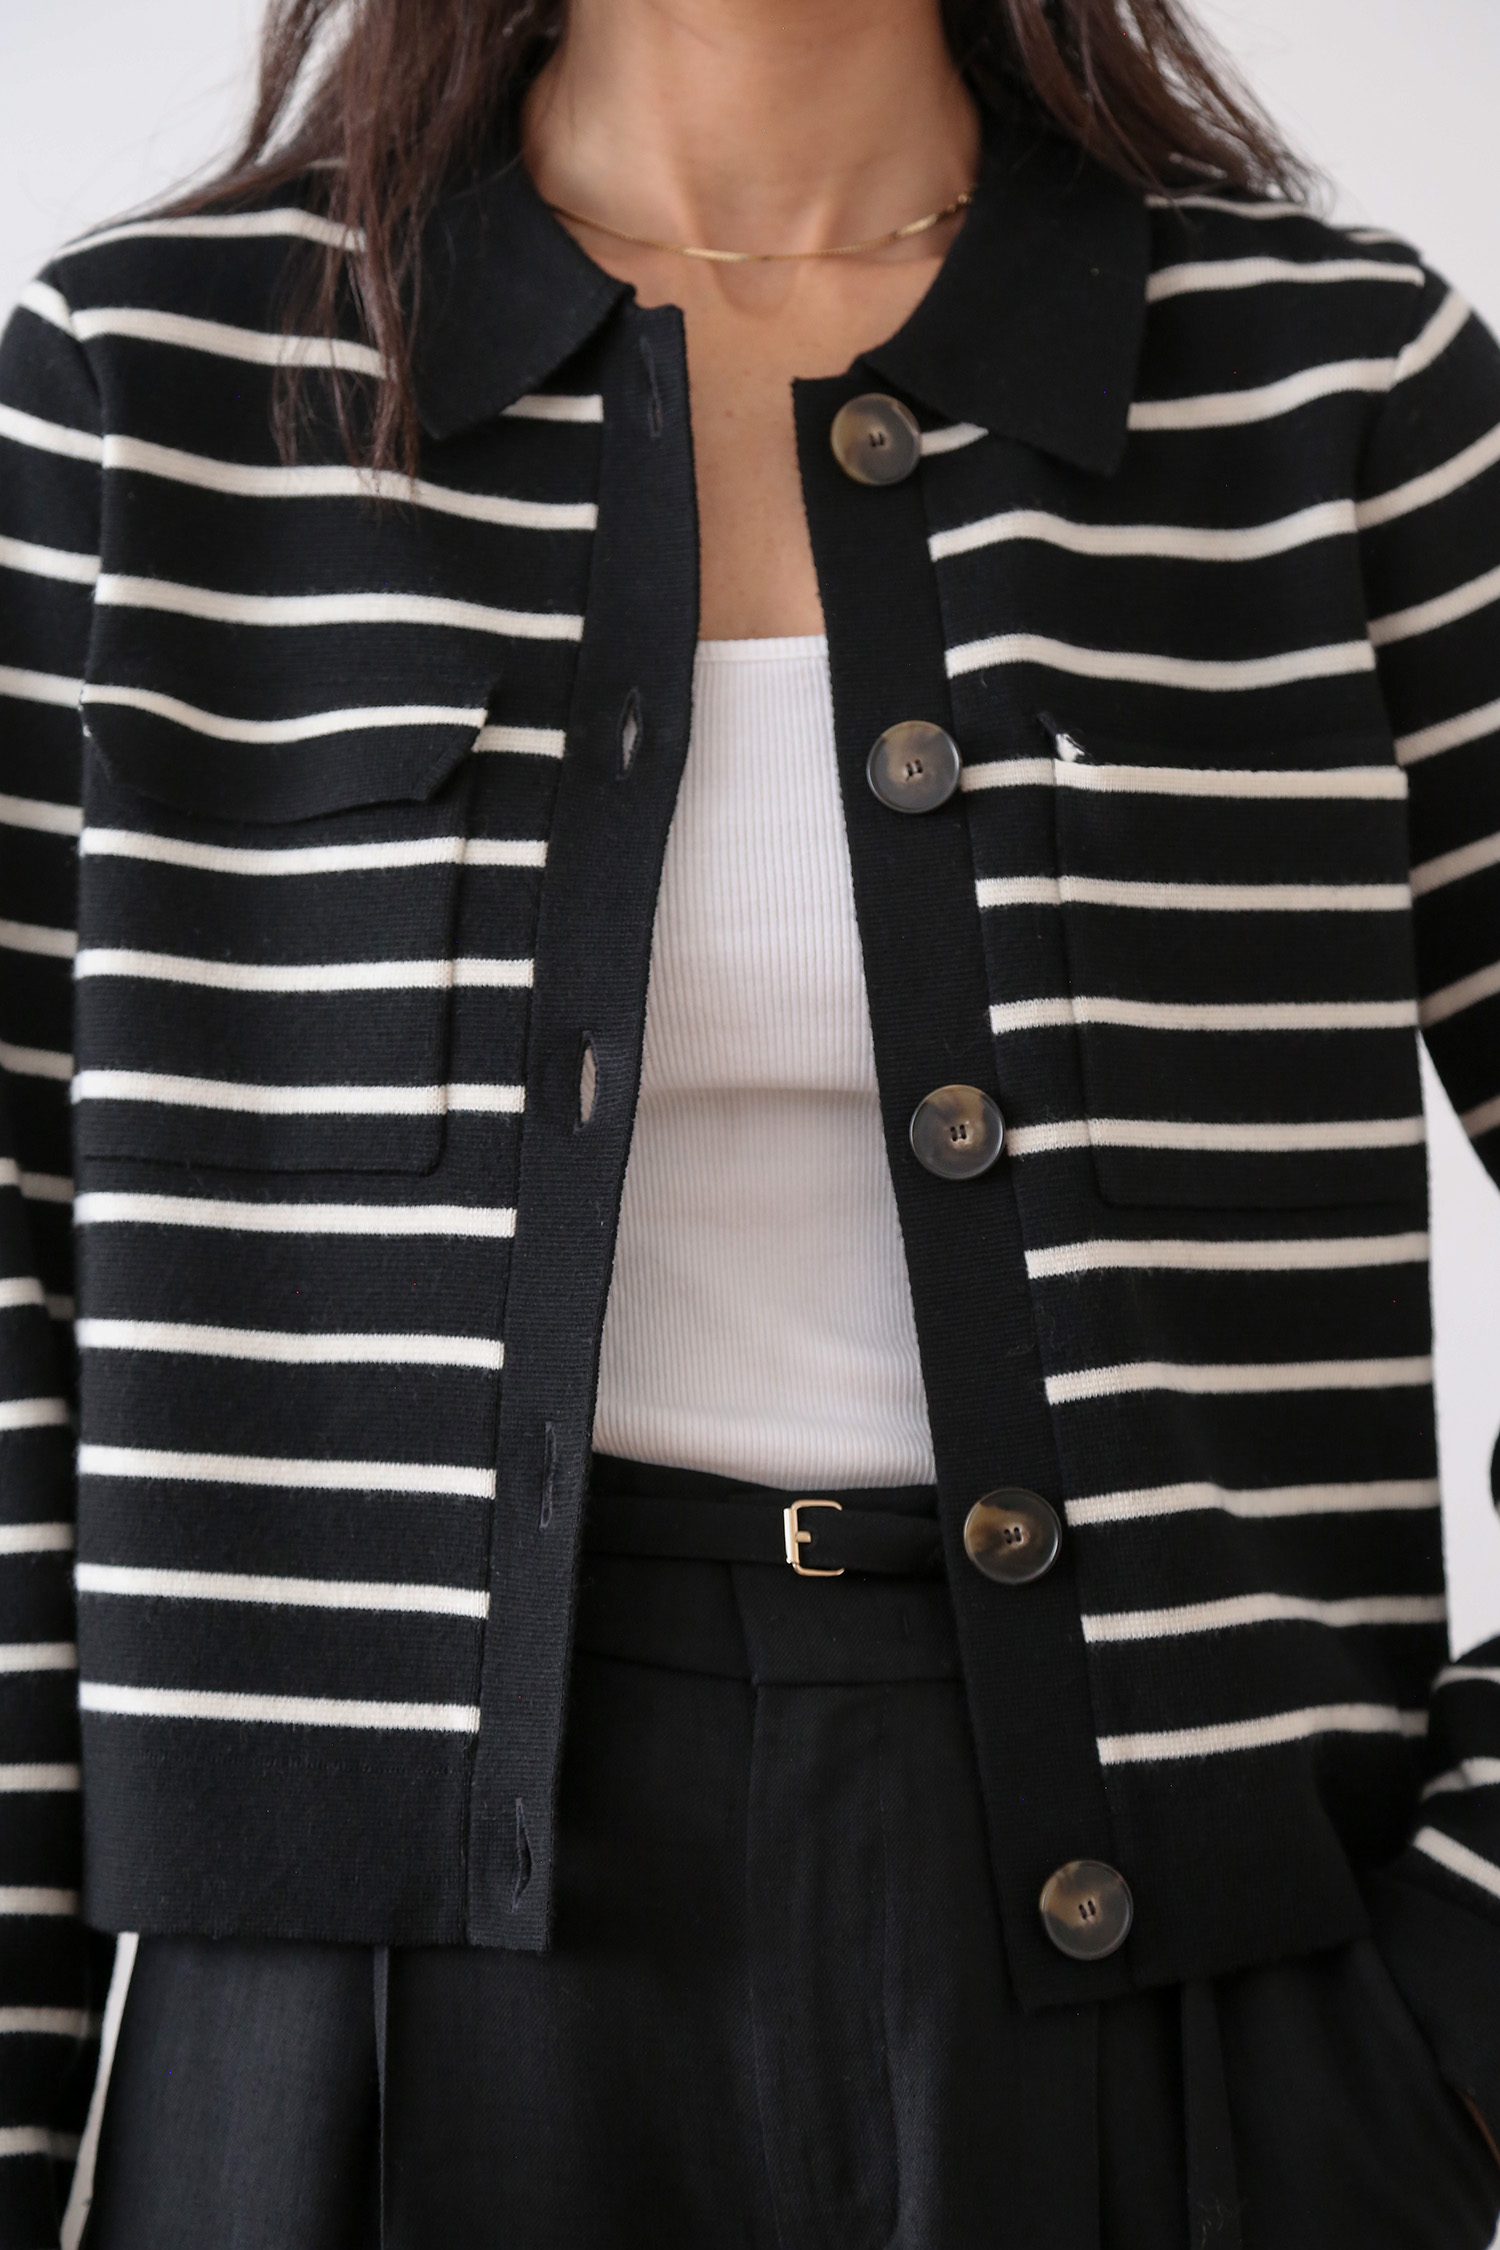 Black and White Striped Knit